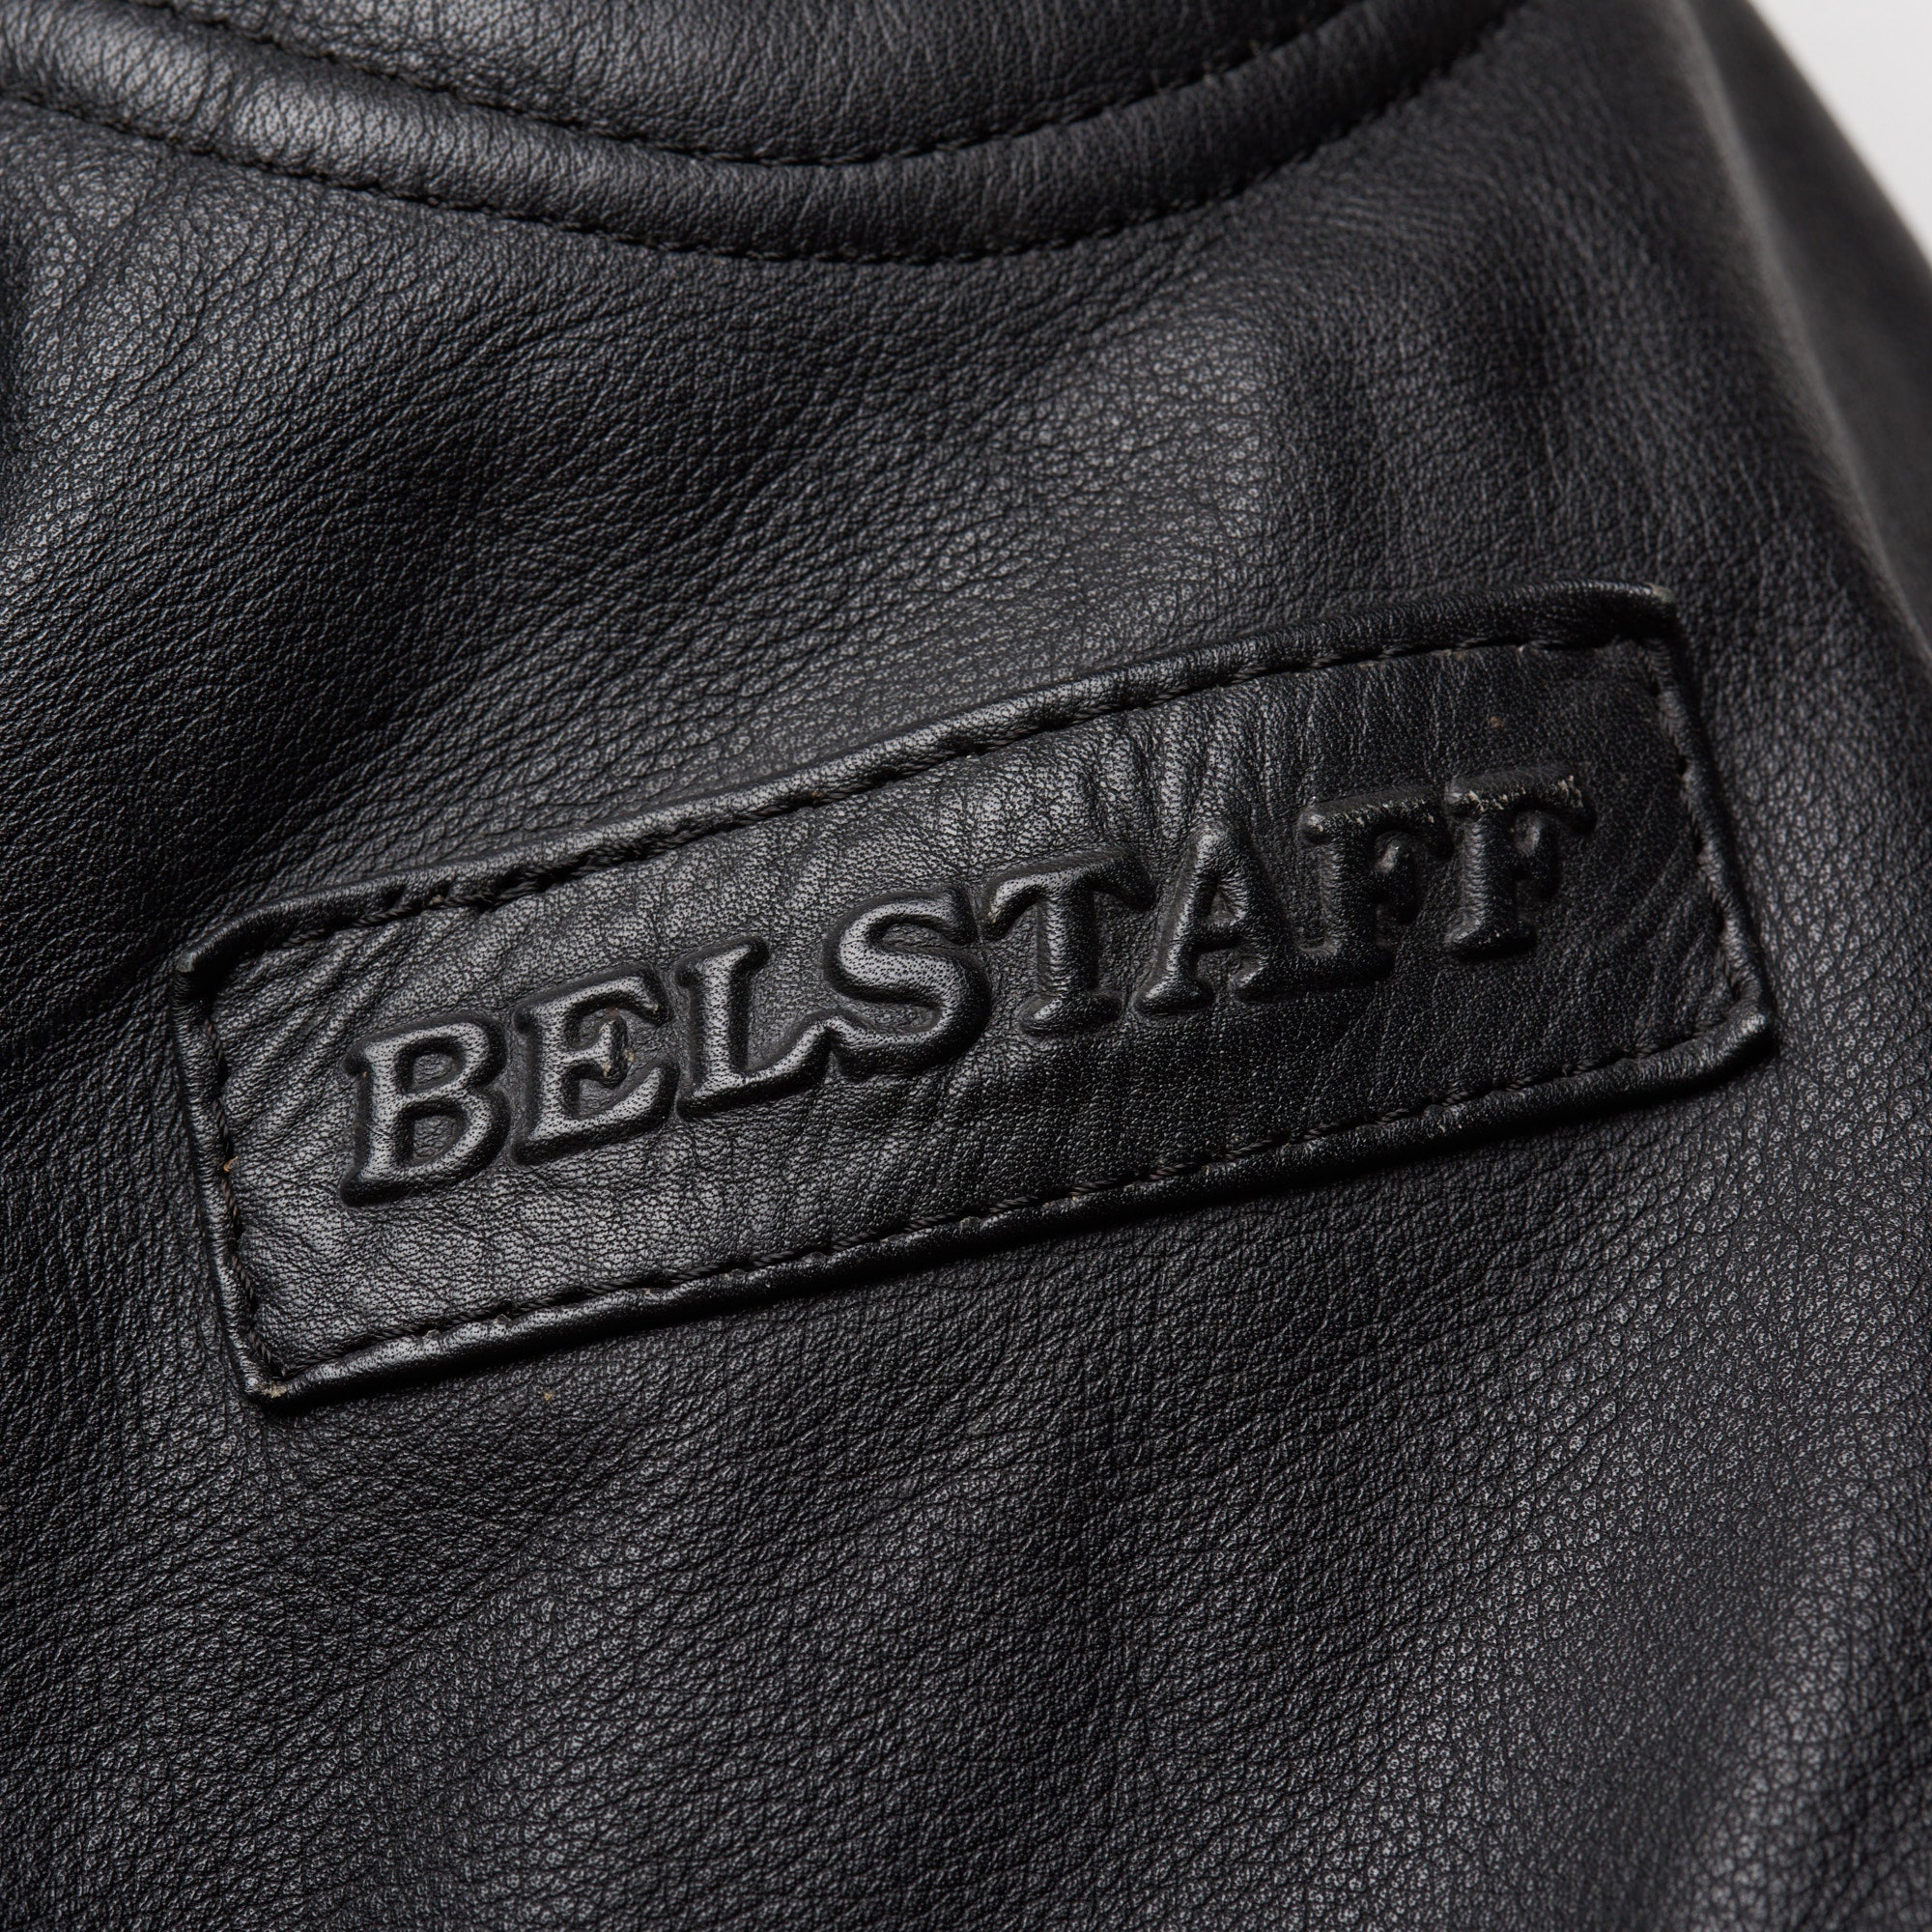 BELSTAFF Black Leather Motorcycle Jacket Protectors Size 44 US S Made in UK